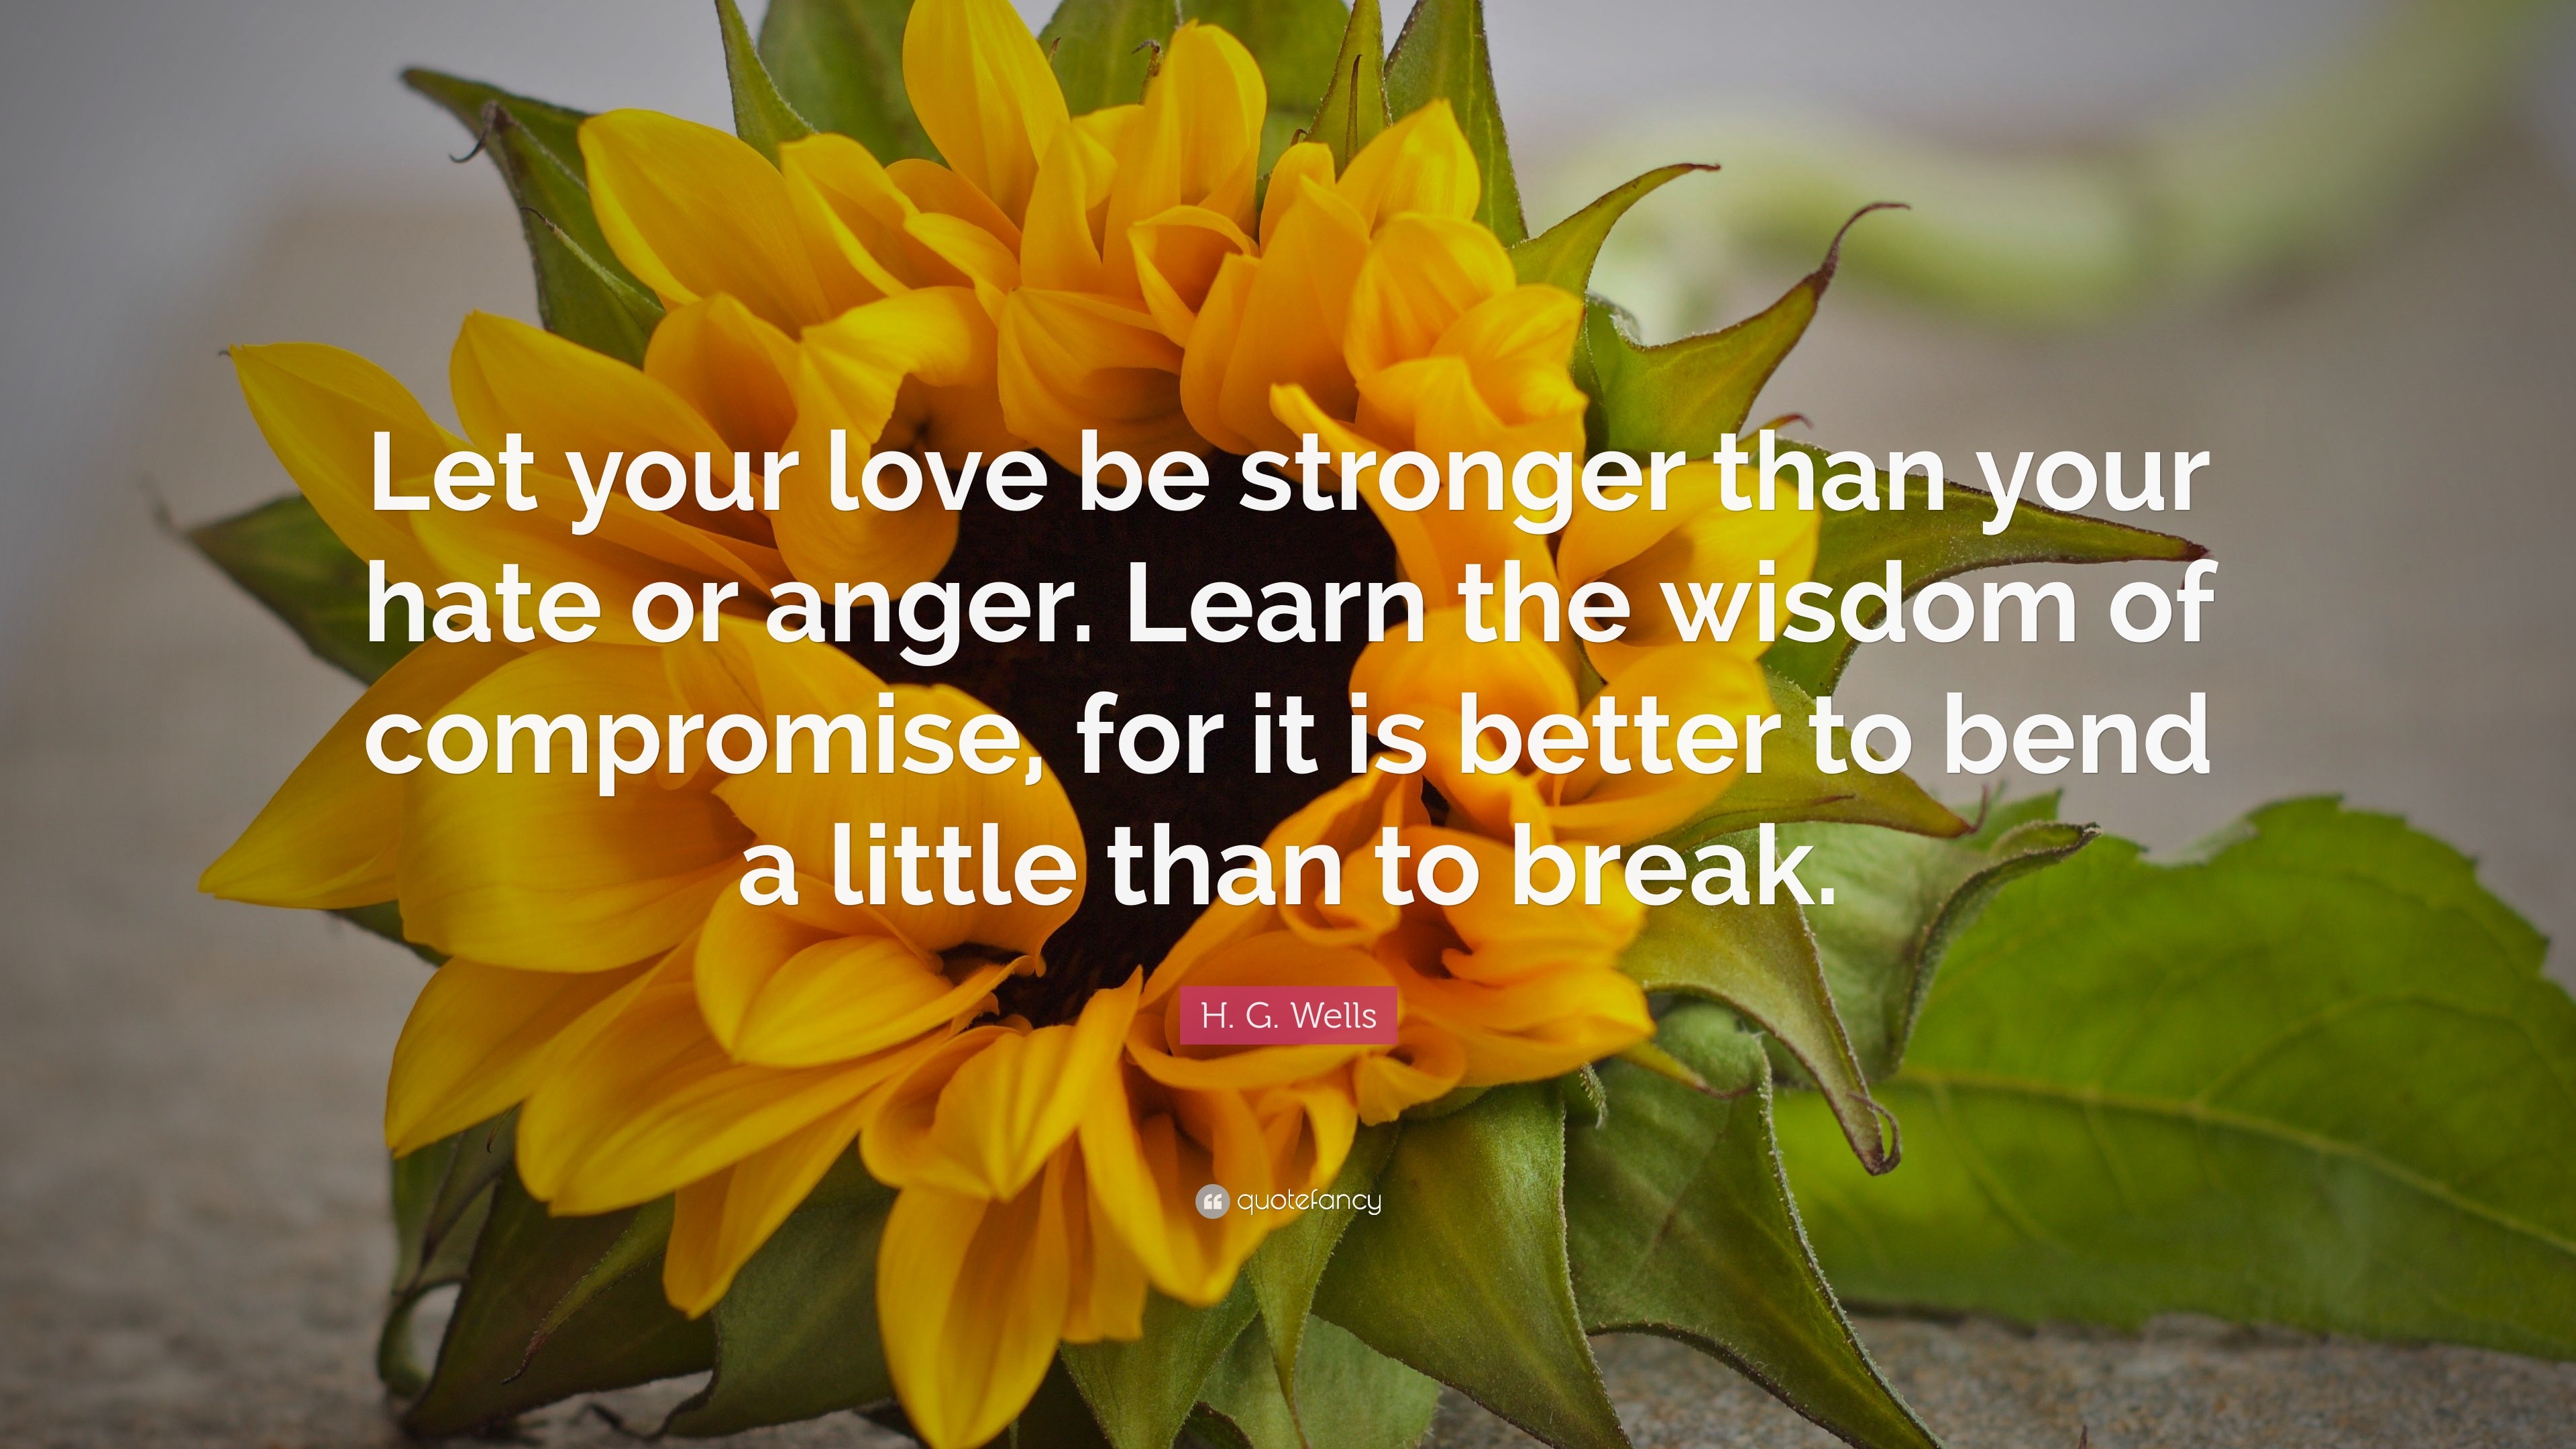 why love is stronger than hate